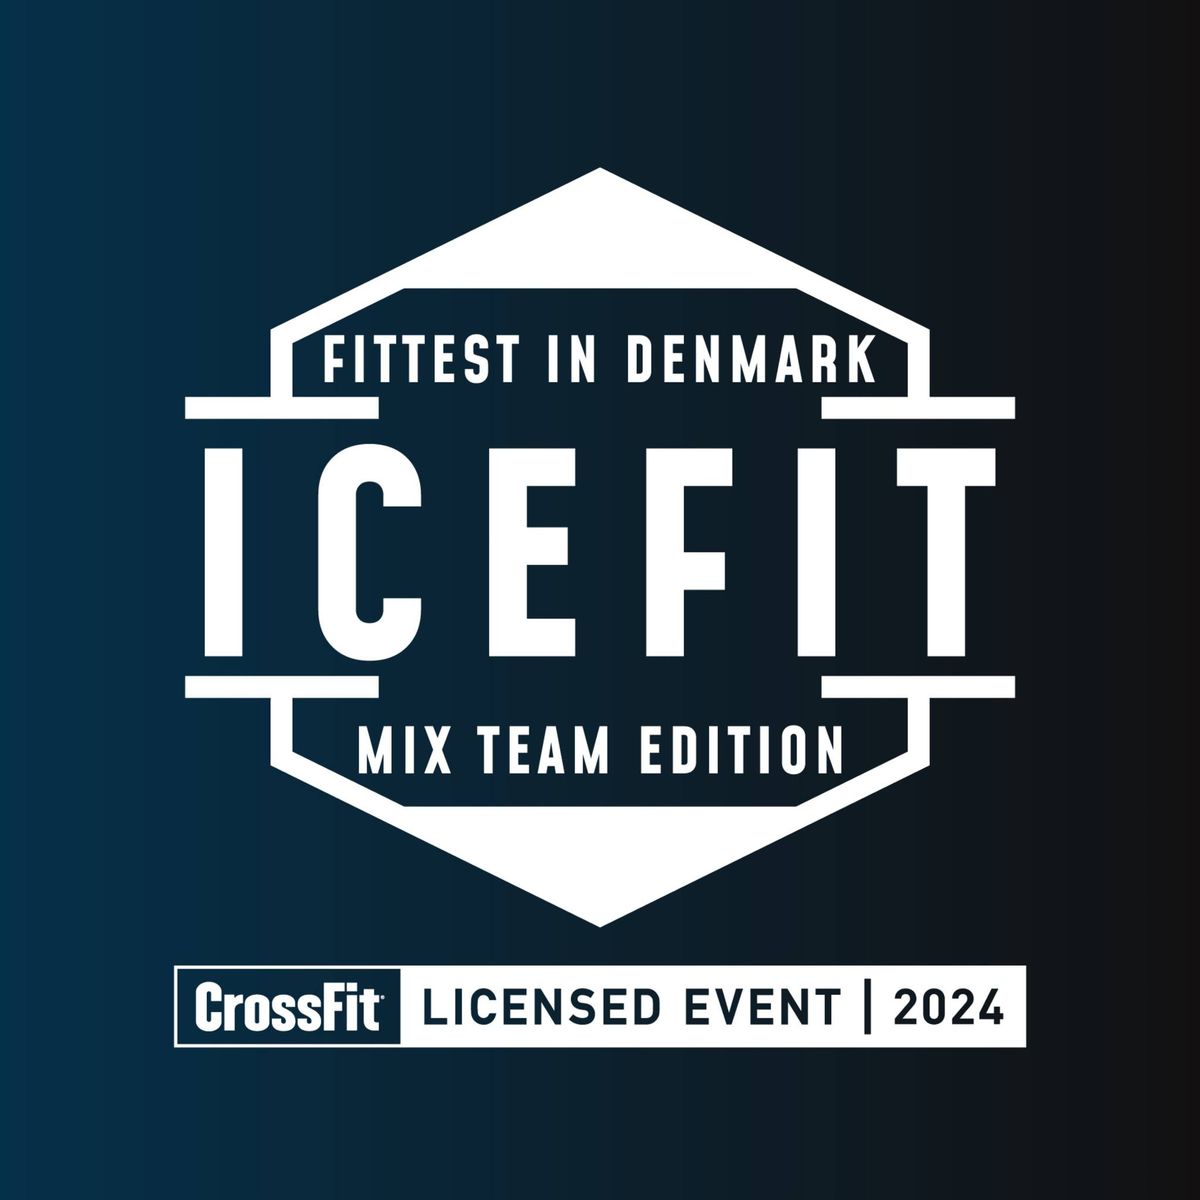 FITTEST IN DENMARK - MIX TEAM EDITION \ud83c\udfc6\ud83d\udca5